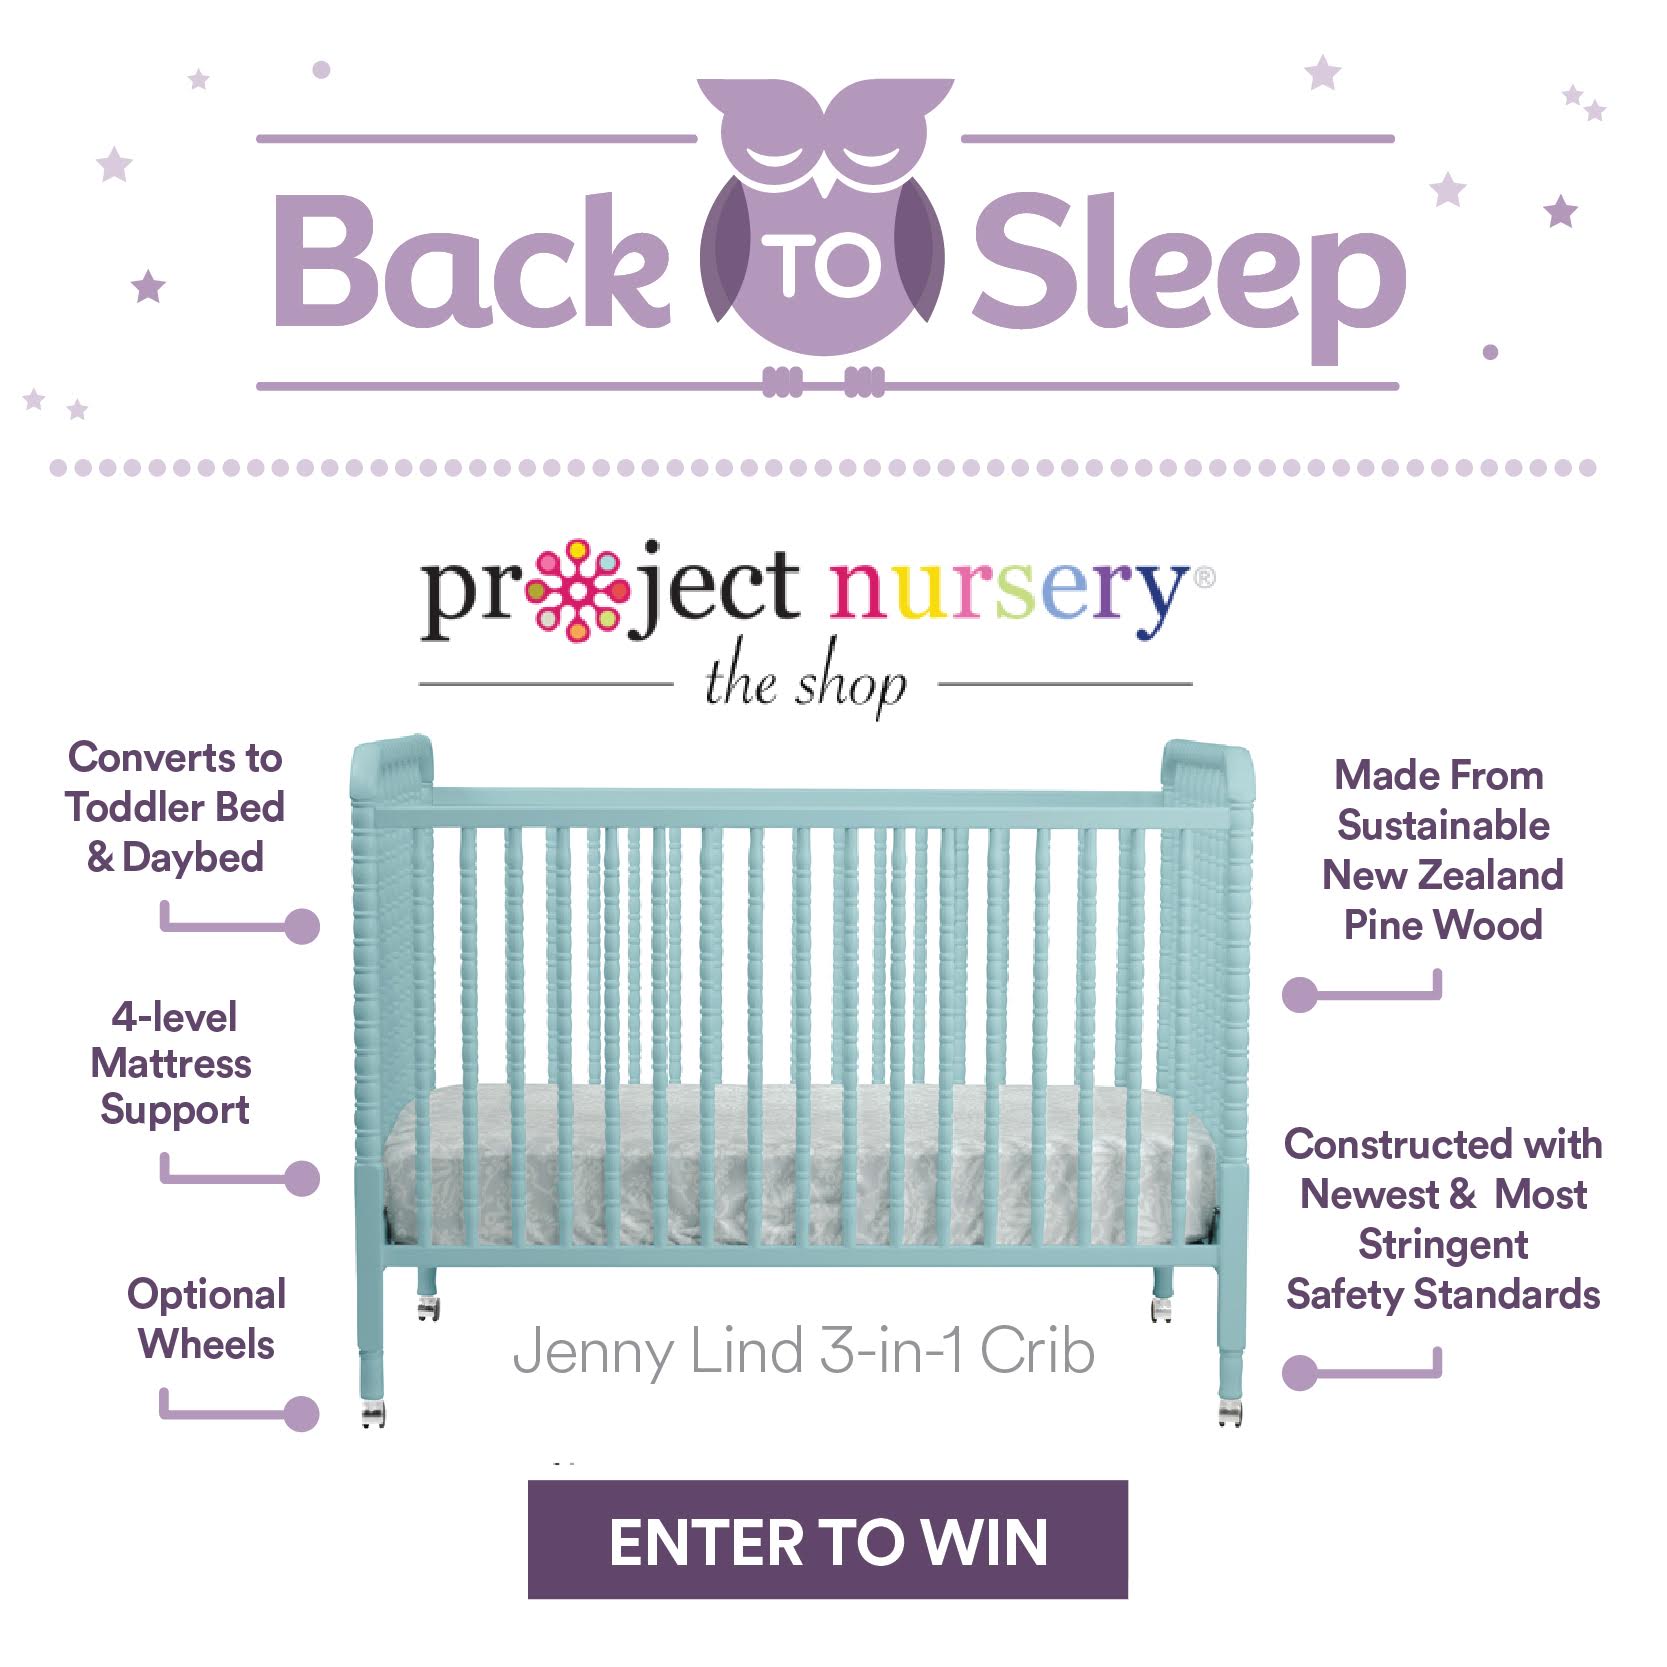 Jenny Lind Crib from The Project Nursery Shop